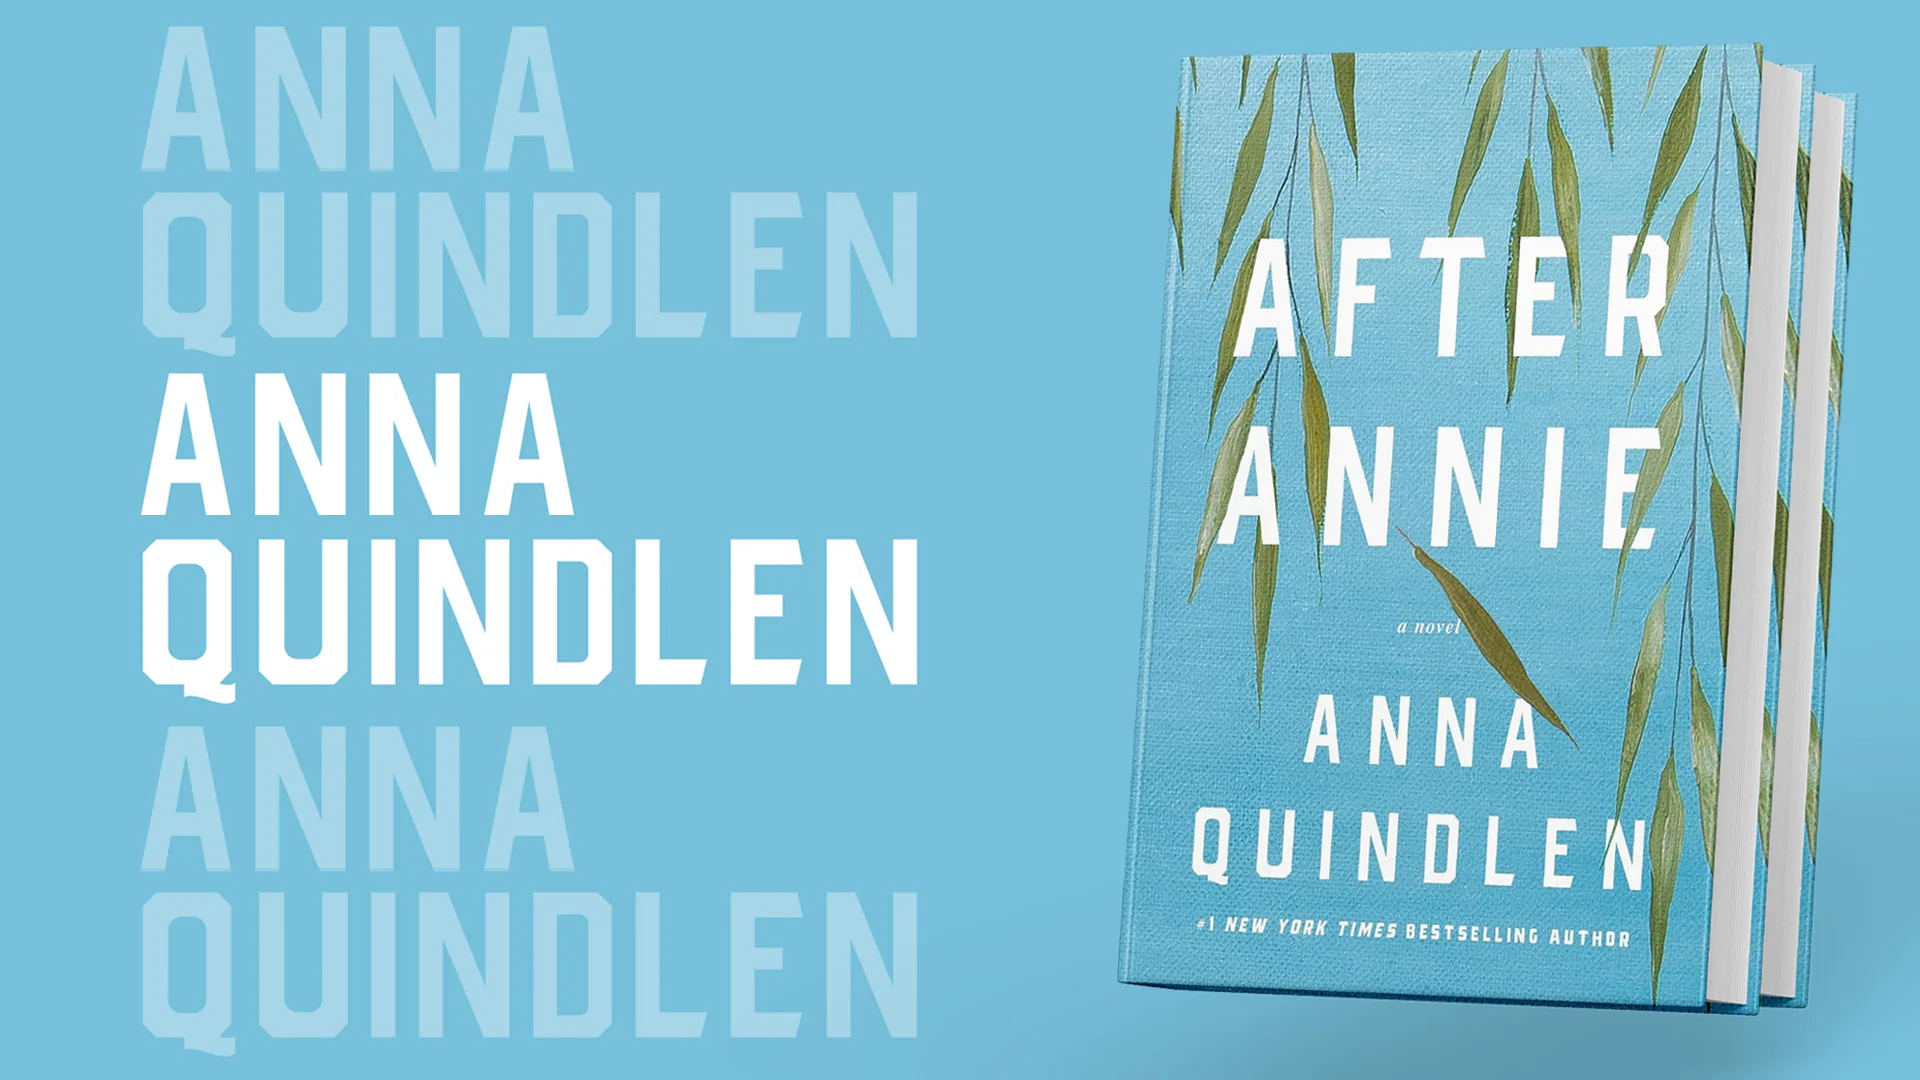 Anna Quindlen Books and Books web banner